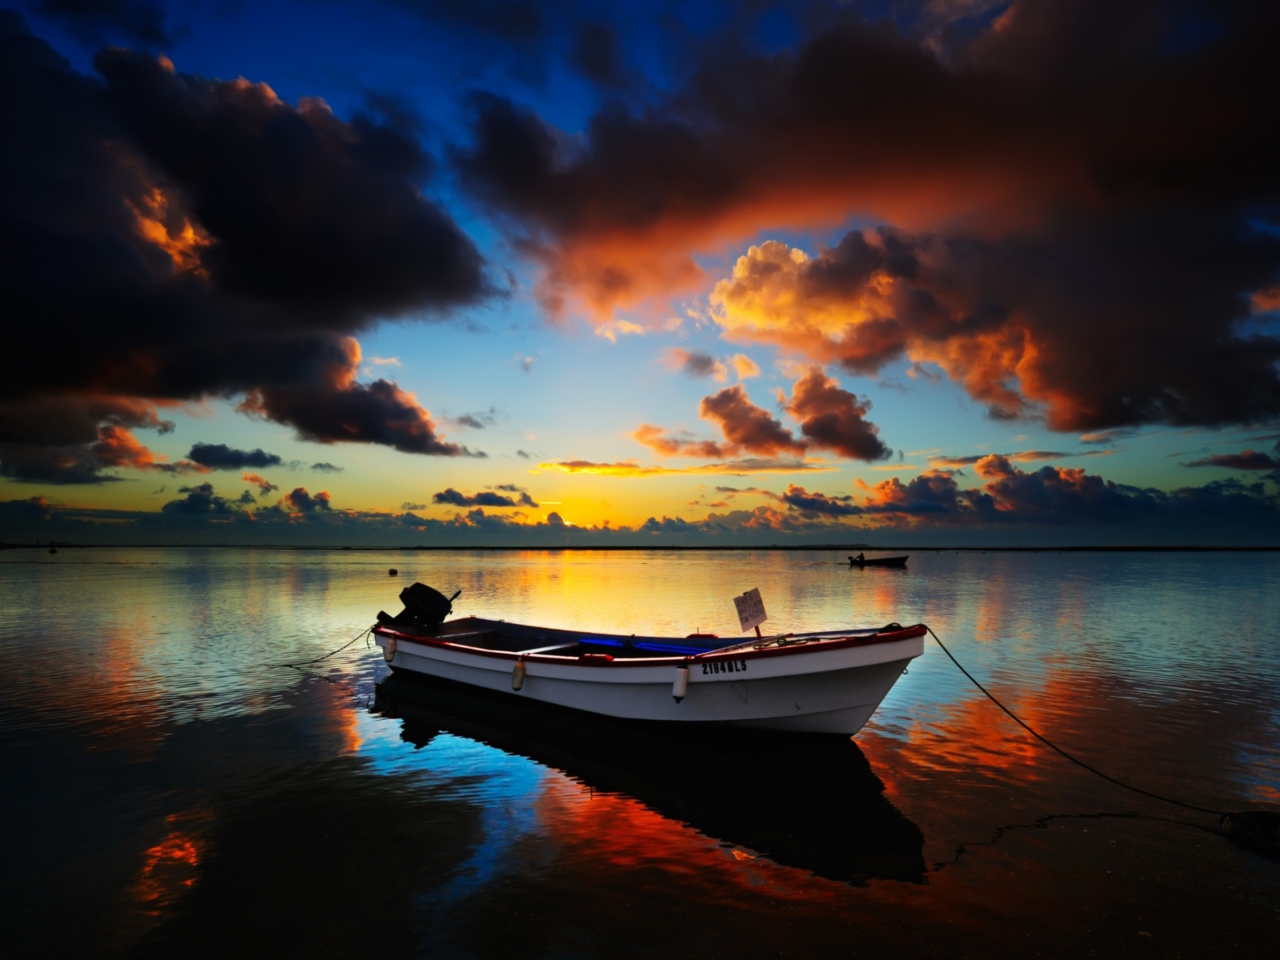 Das Boat In Sea At Sunset Wallpaper 1280x960